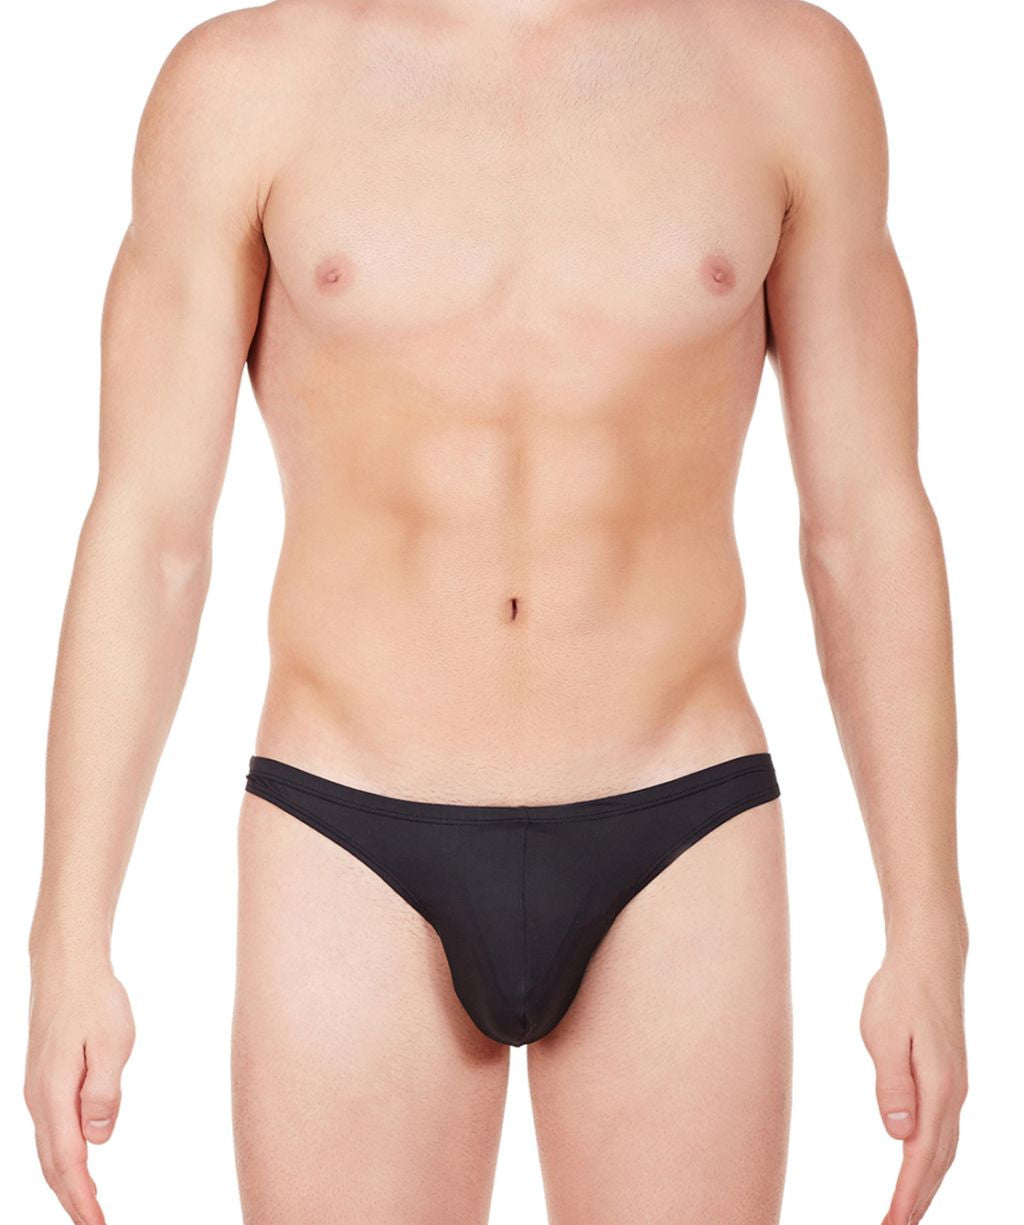 La Intimo Charcoal Underwear - Get Best Price from Manufacturers